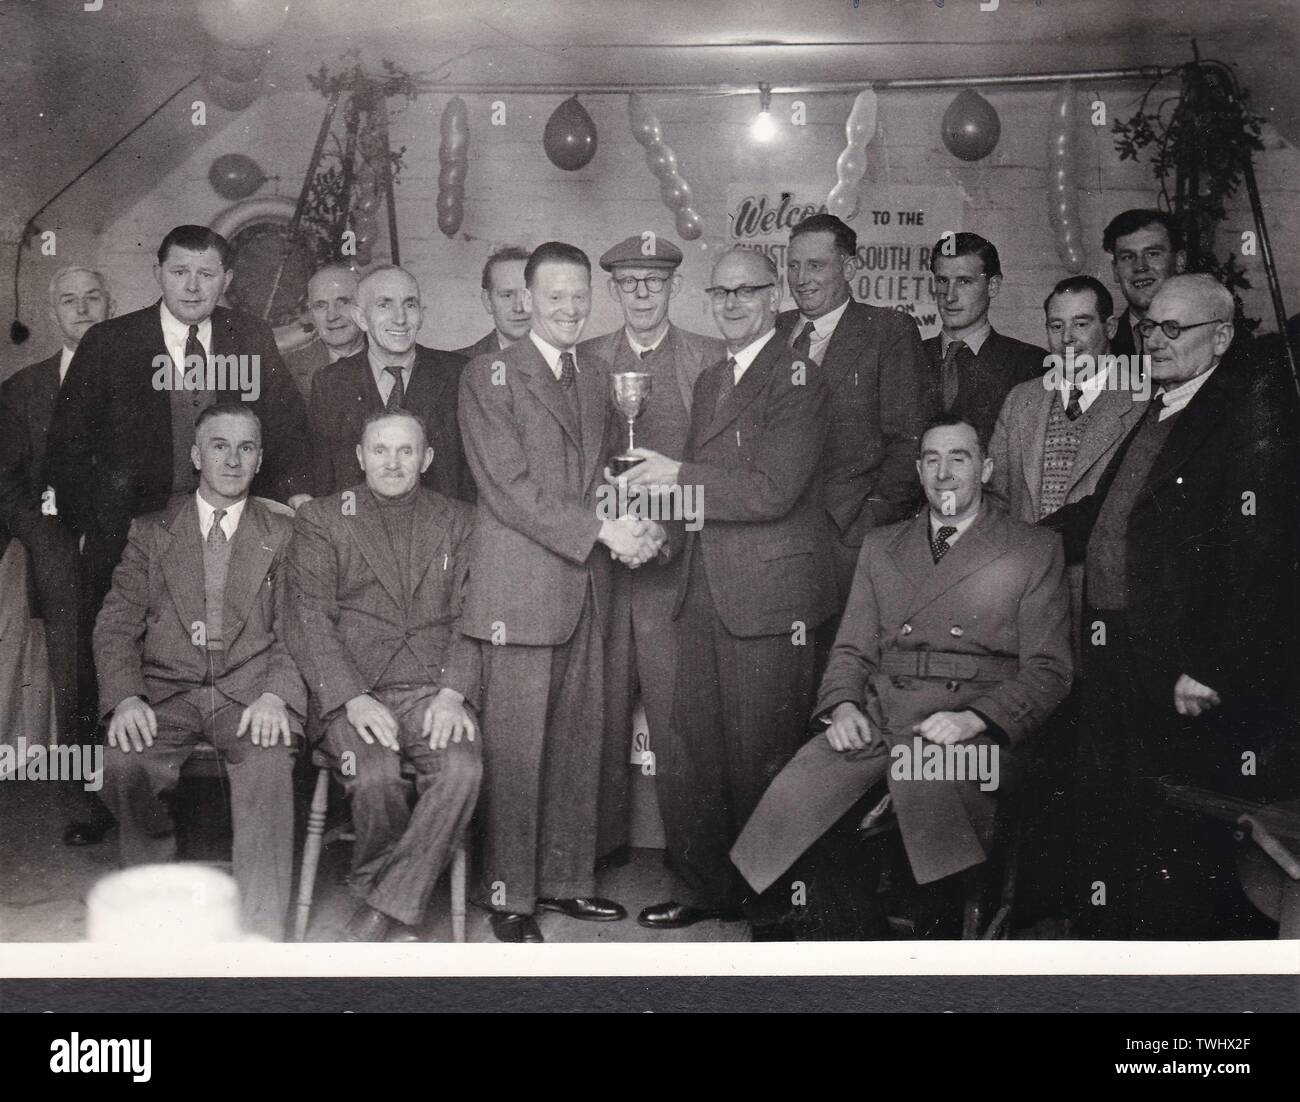 Vintage black and white photo of group of men, awarding being presented Stock Photo